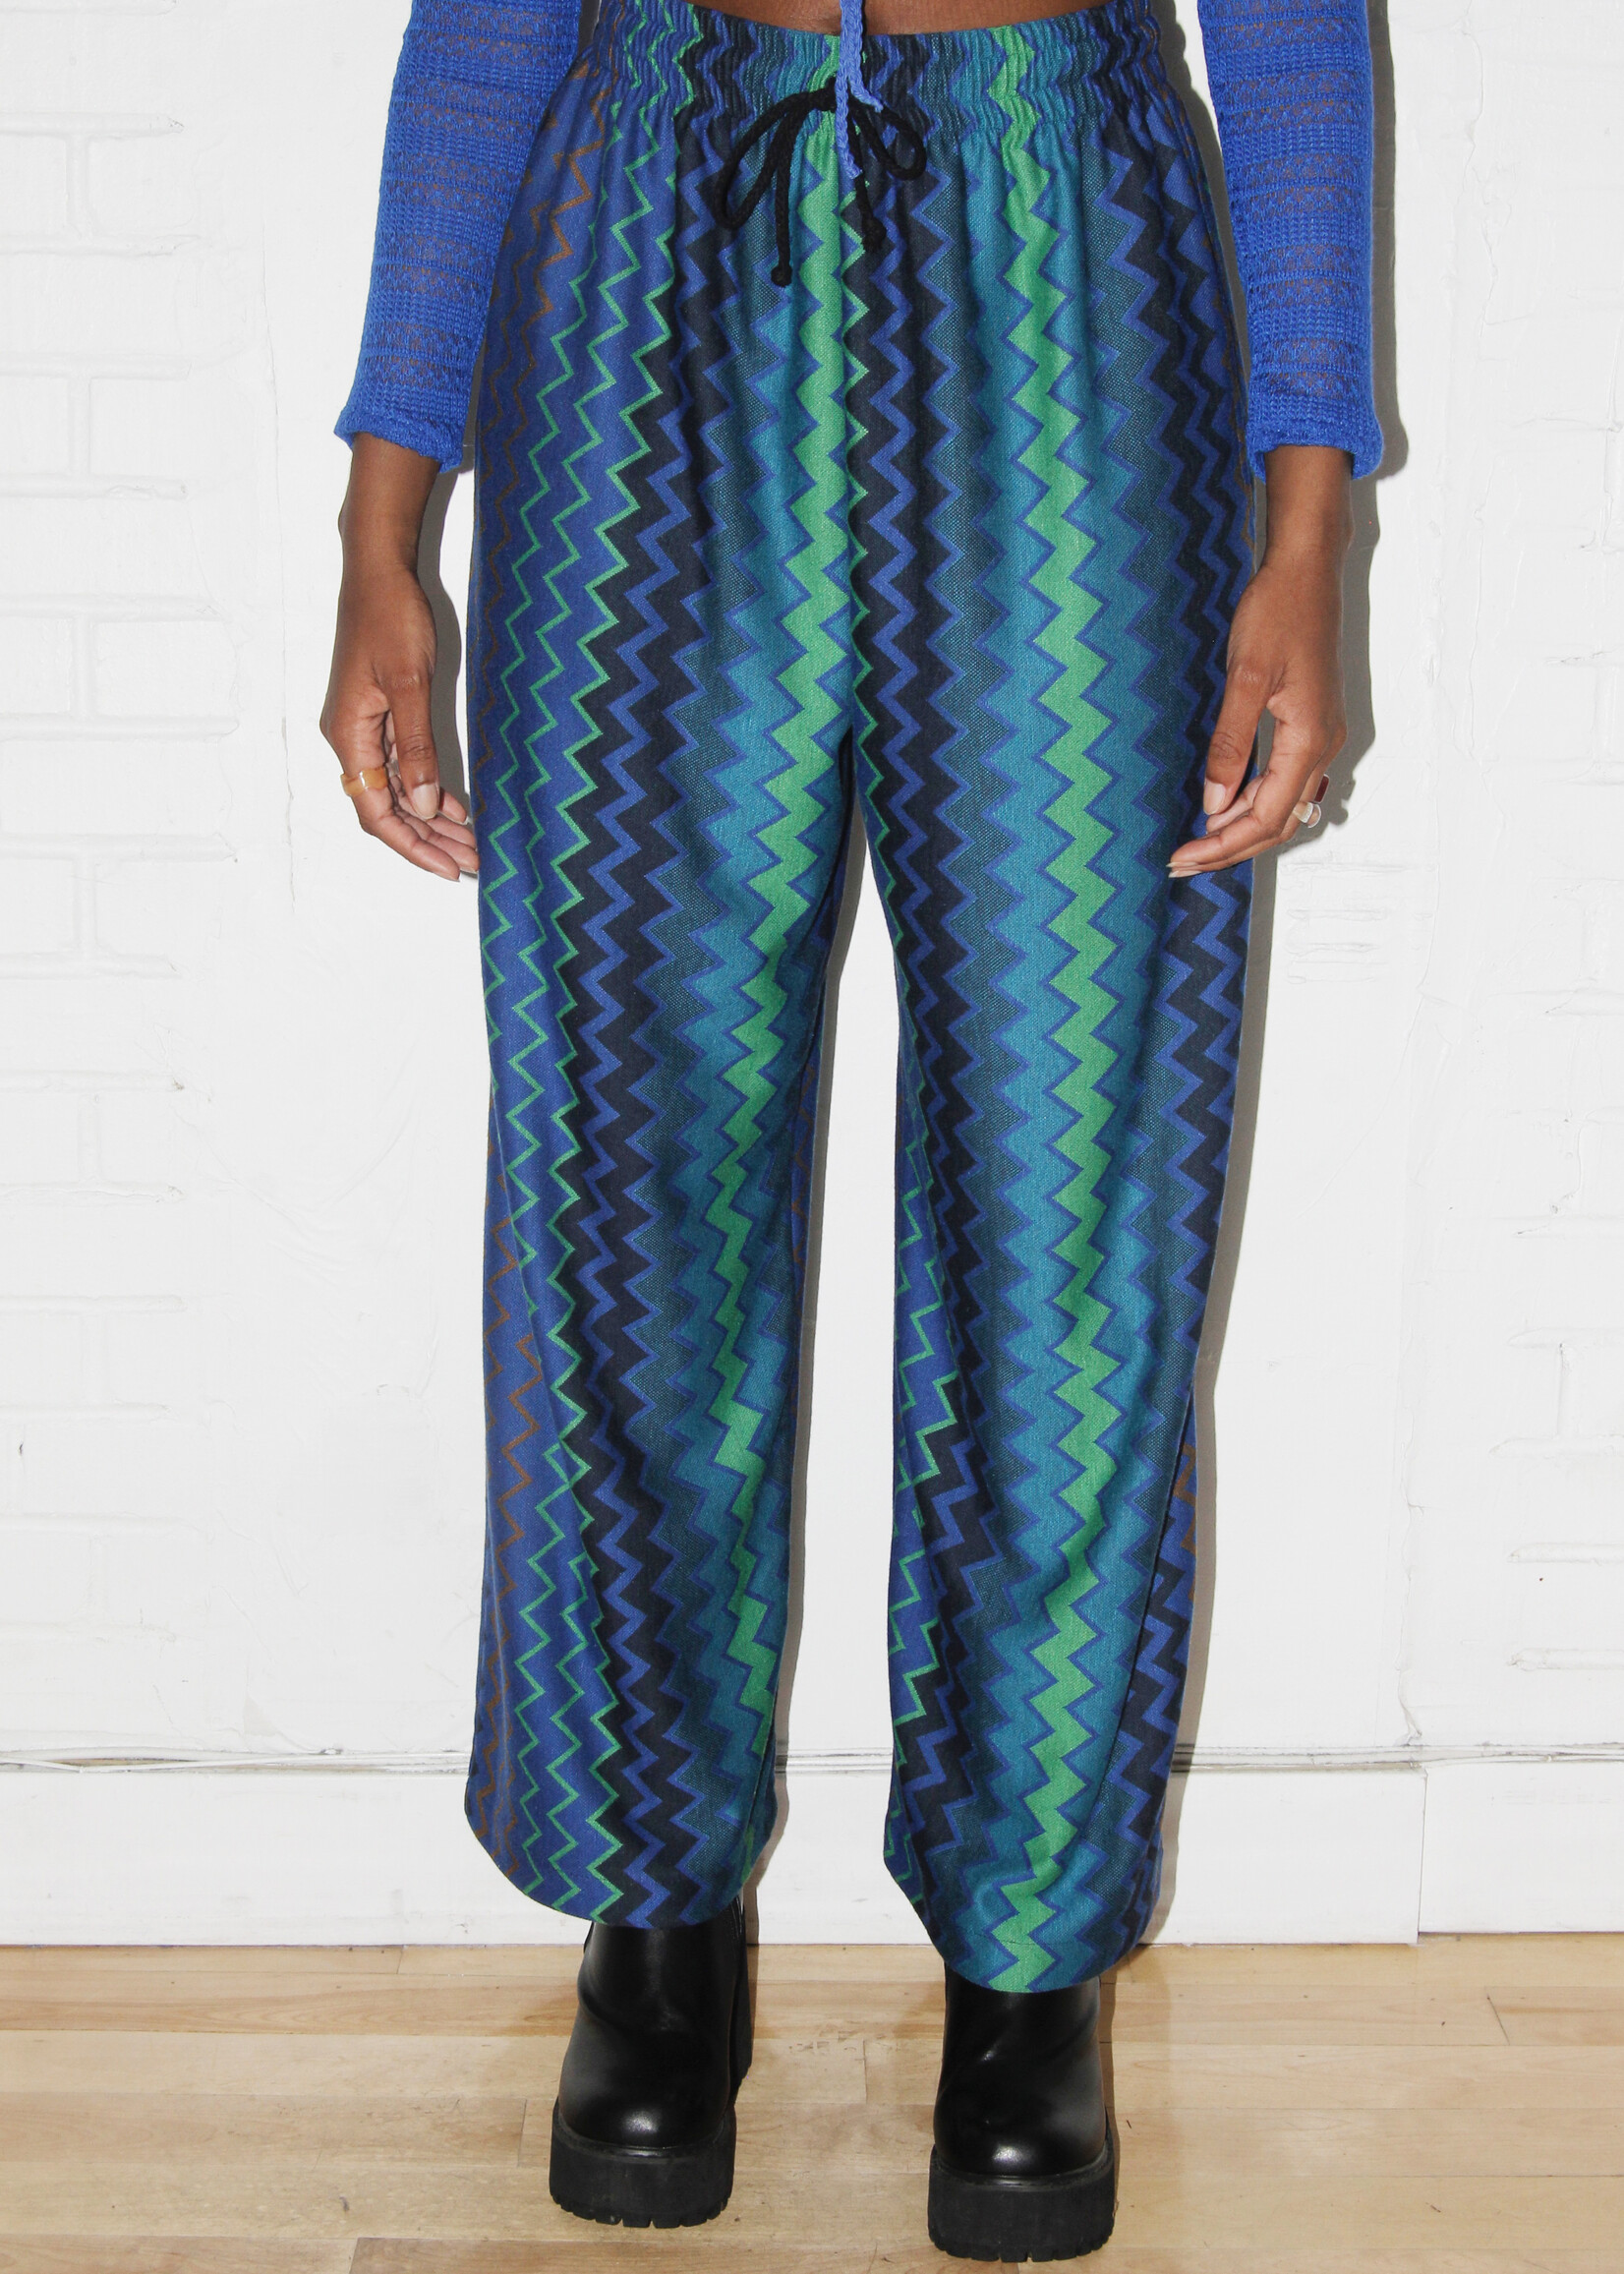 Studio Citizen Studio Citizen Relaxed Fit Drawstring Pant in Blue, Green and Brown Zig Zag